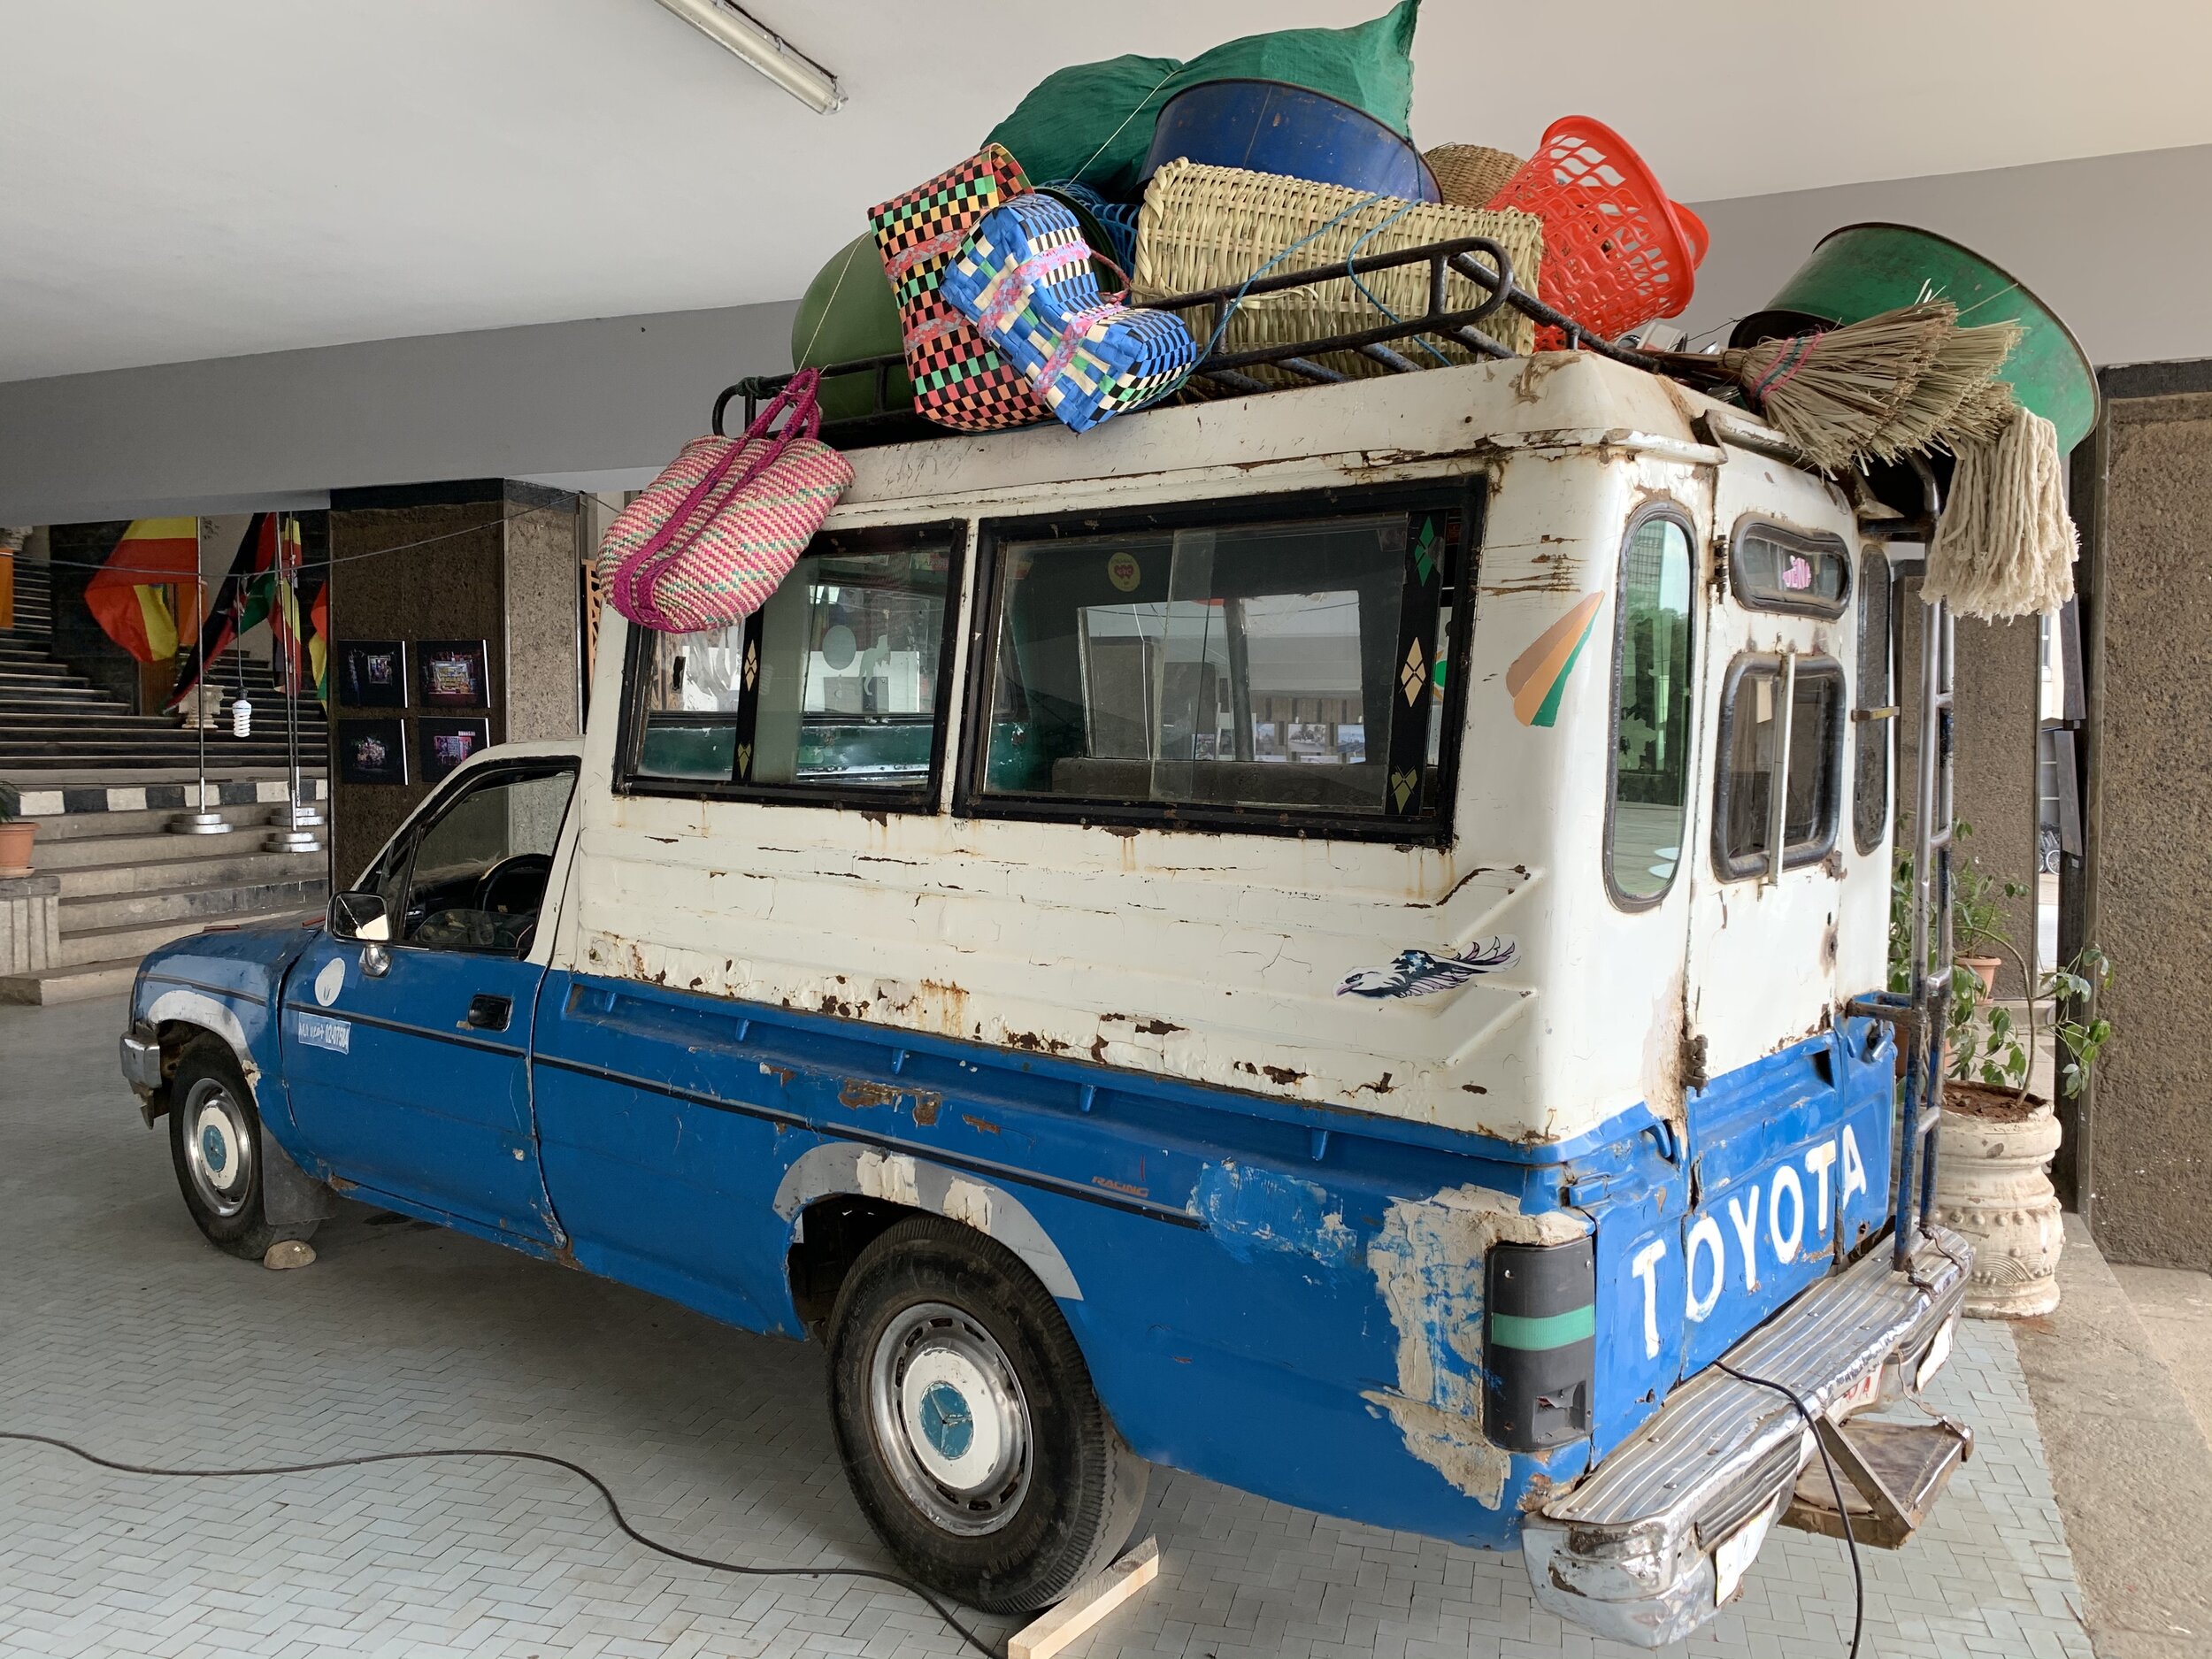 A full pick-up version of the ubiquitous "blue donkey" (Addis's taxi cabs).